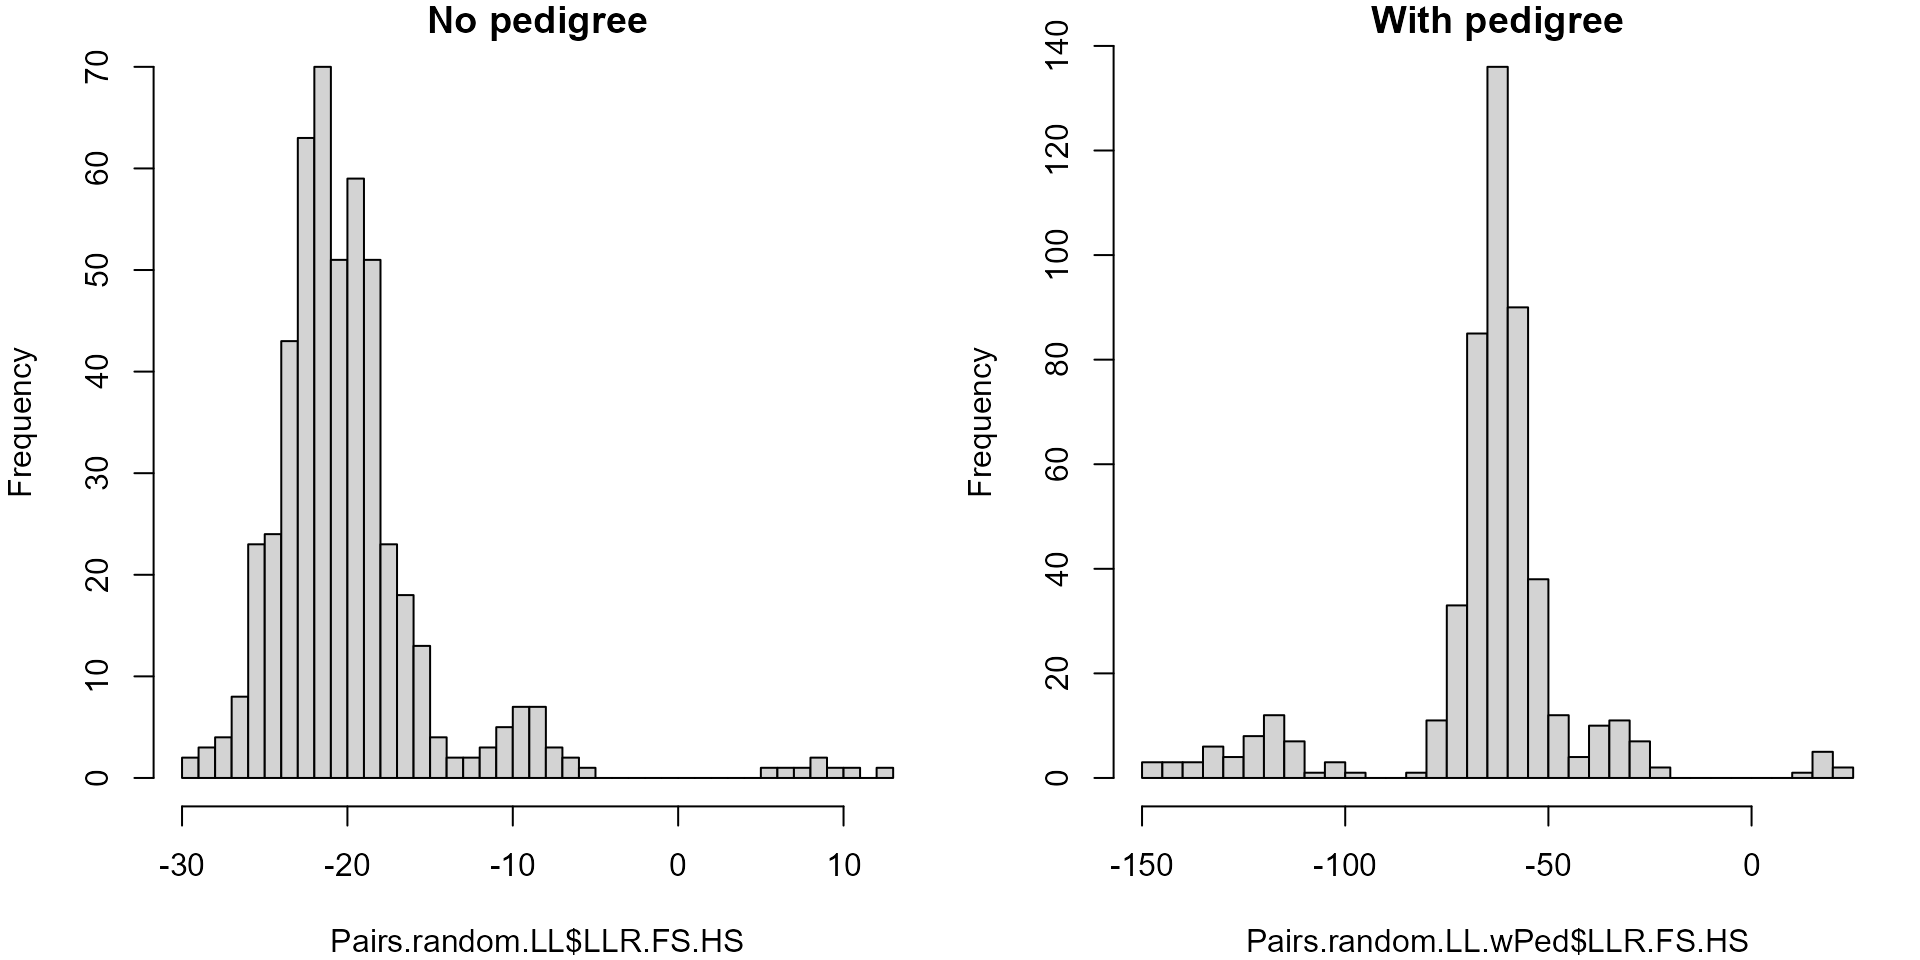 Log10 likelihood ratios full sibling vs half sibling, calculated without pedigree (left) and conditional on a partial inferred pedigree (right). Note difference in scale on the x-axes. 